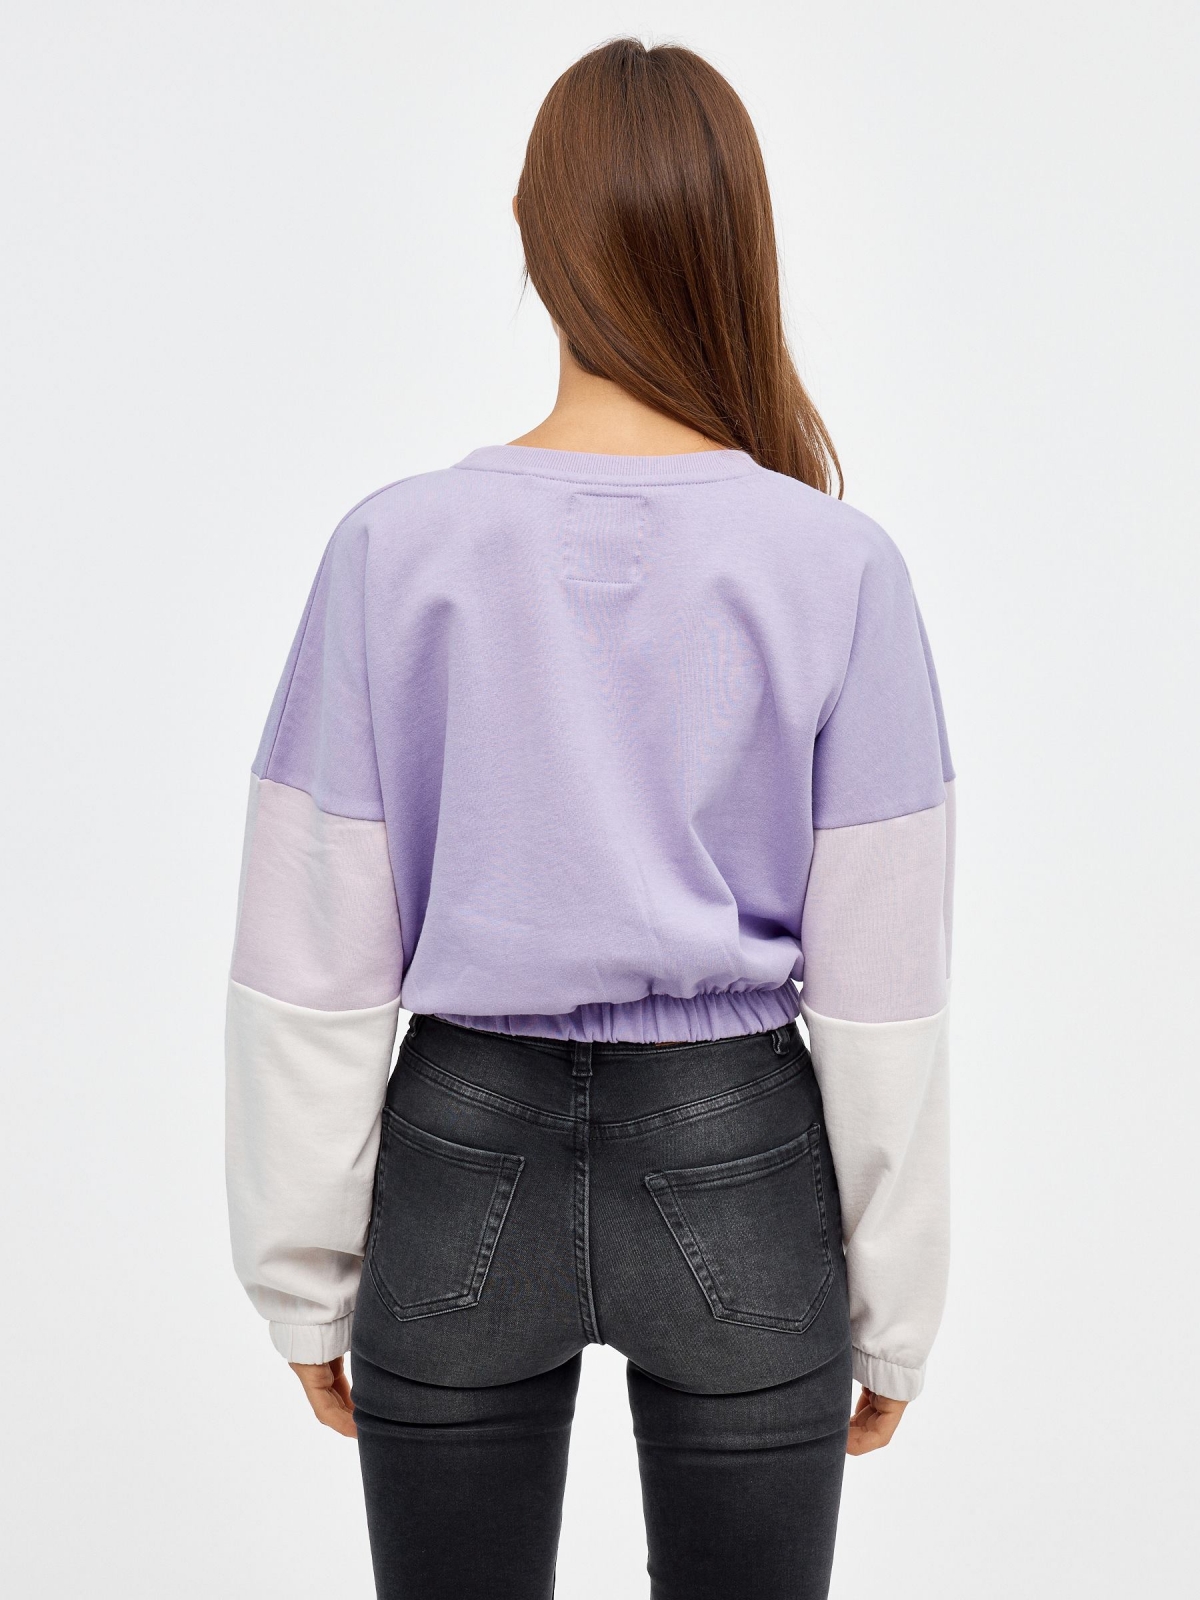 Crop sweatshirt with pockets mauve middle back view